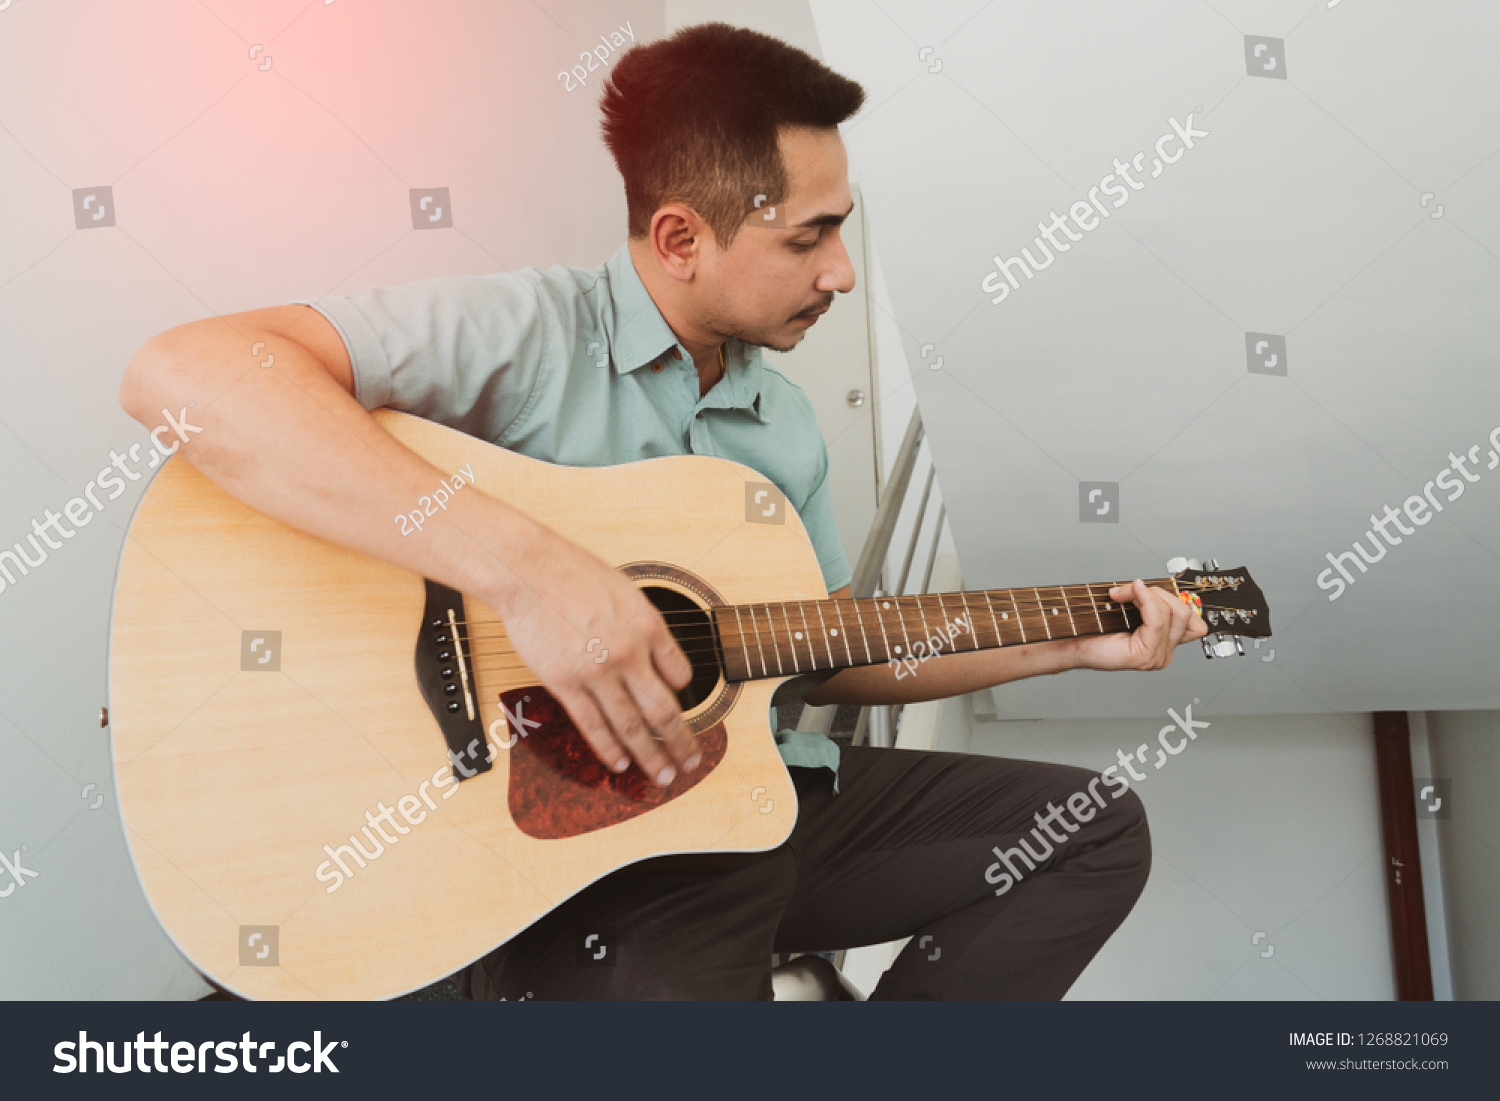 Cheerful guitarist. Cheerful handsome young man playing guitar and smiling while sitting on banister, Vintage color #1268821069